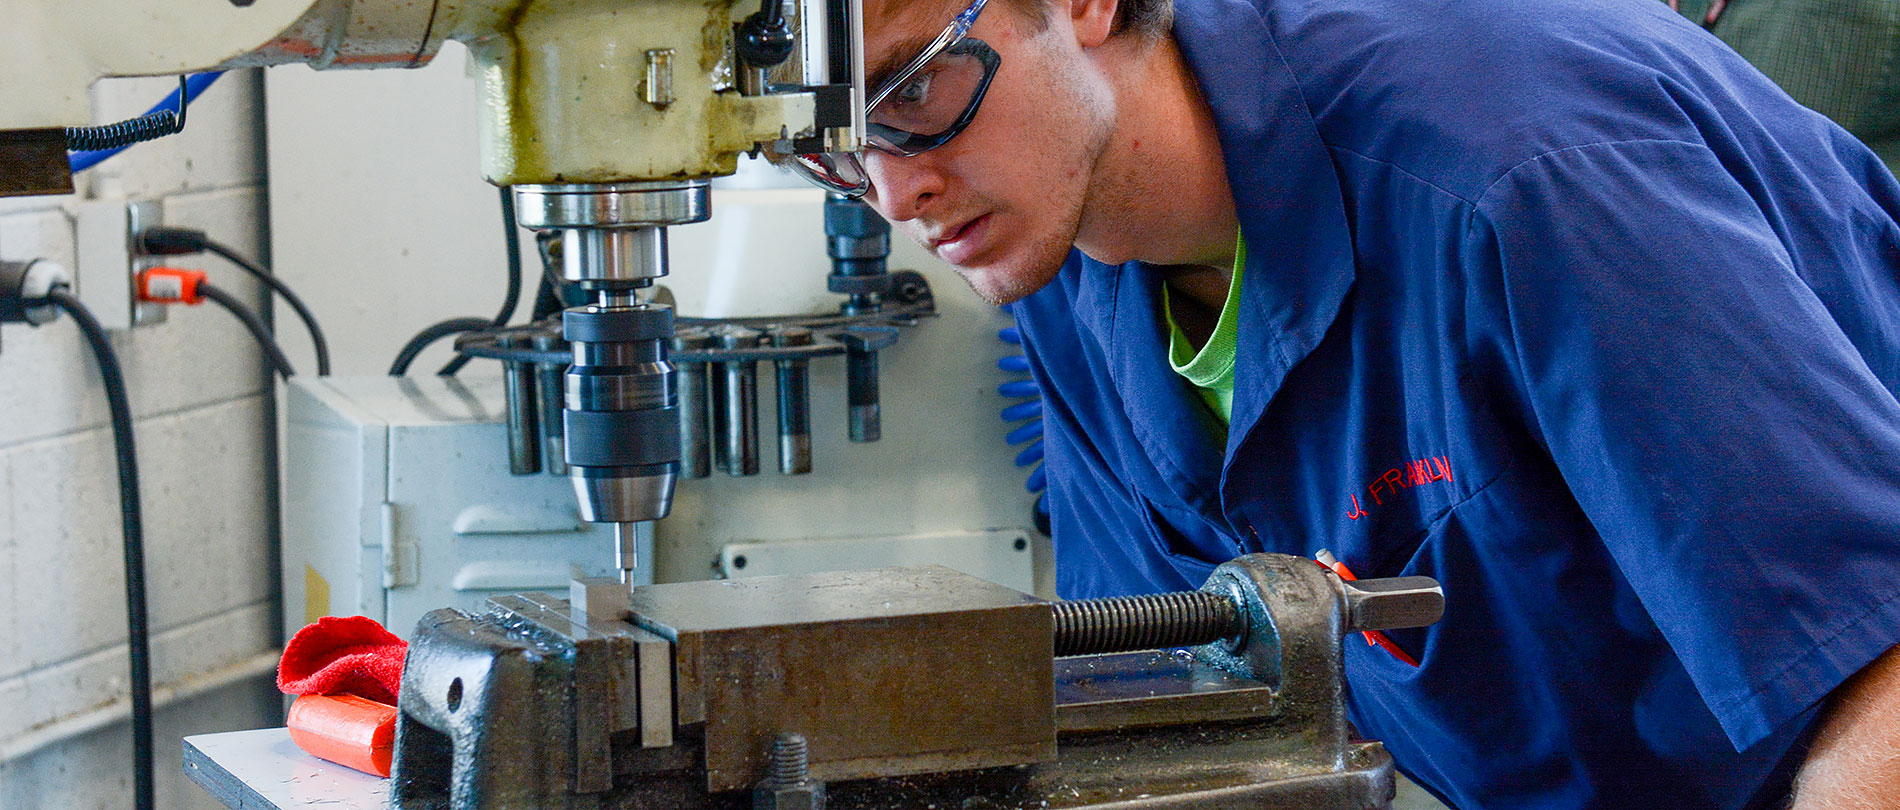 Student intently looks at machining equipment during a class.